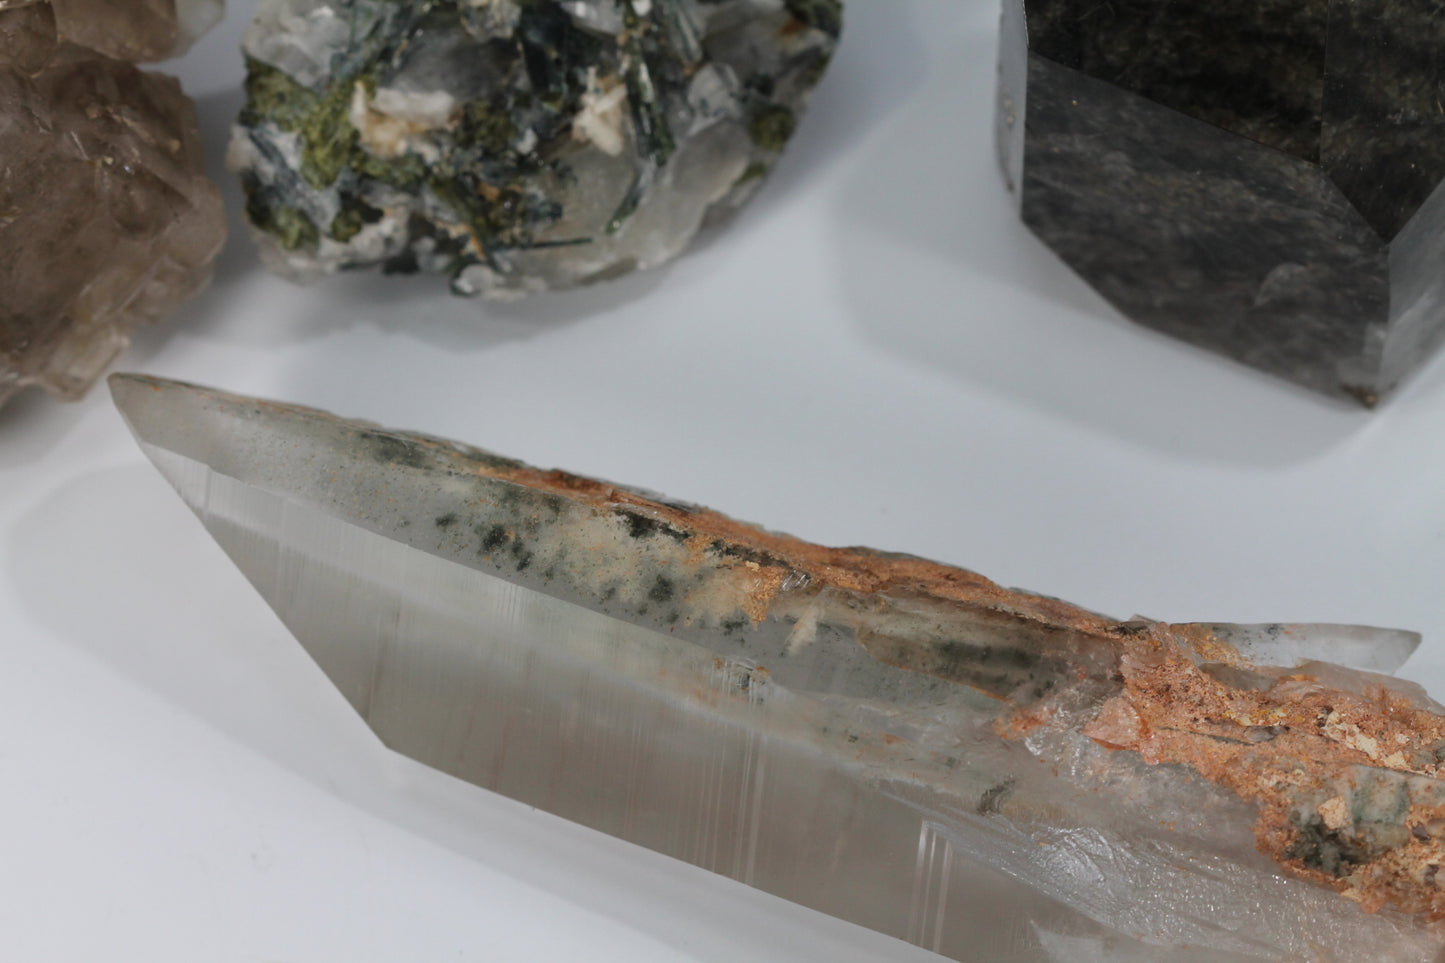 Large Lemurian Quartz Crystal with Inclusions